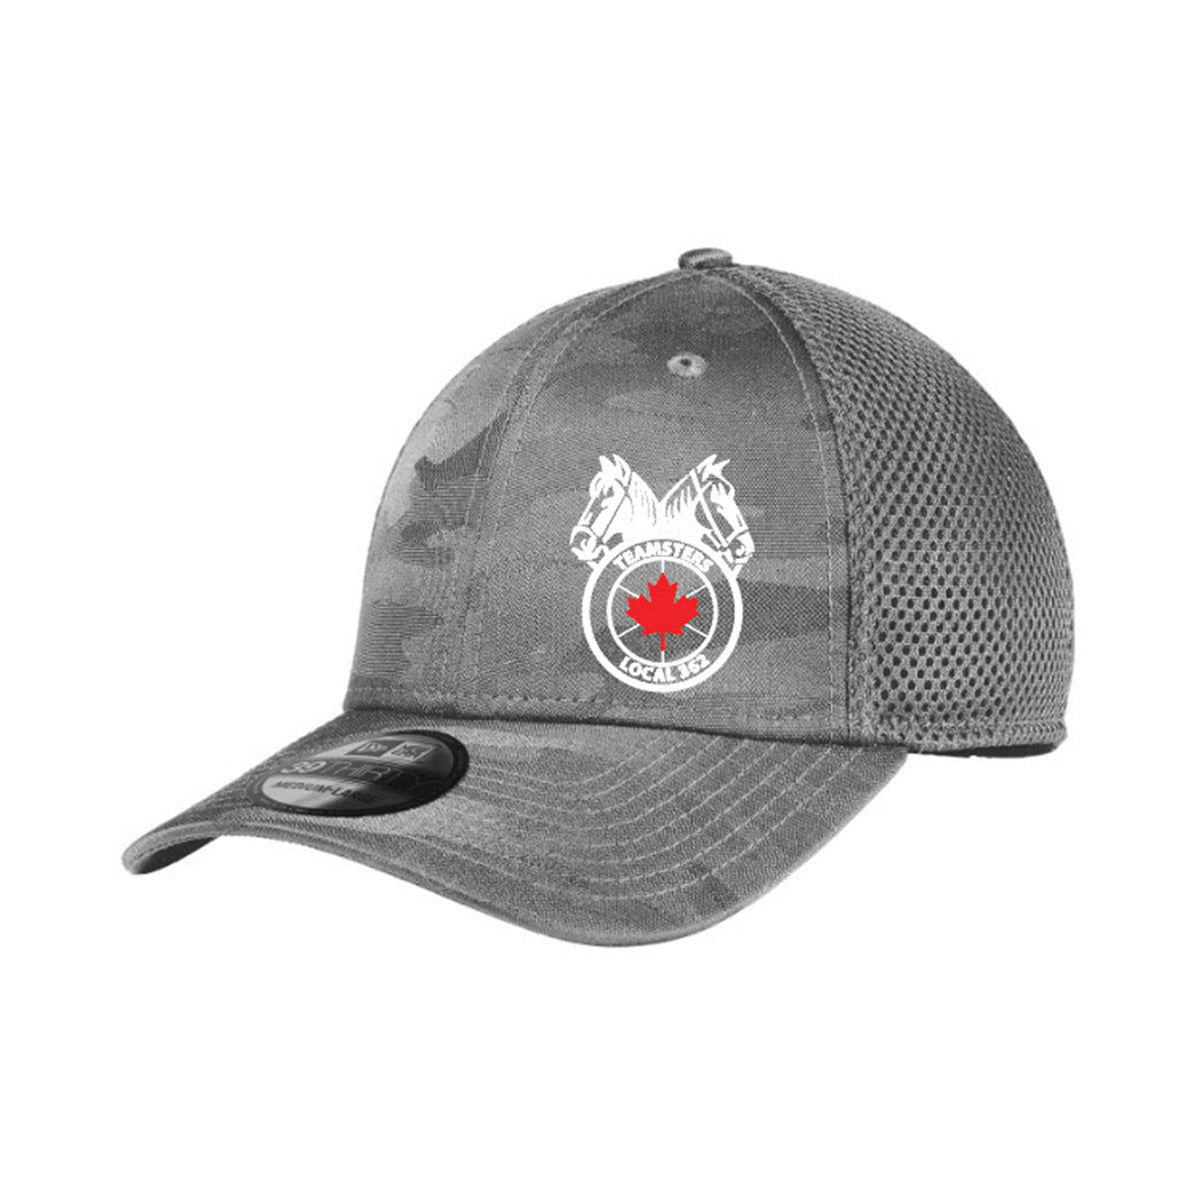 Teamsters 362 - Tonal Camo Cap - White & Red Embroidery